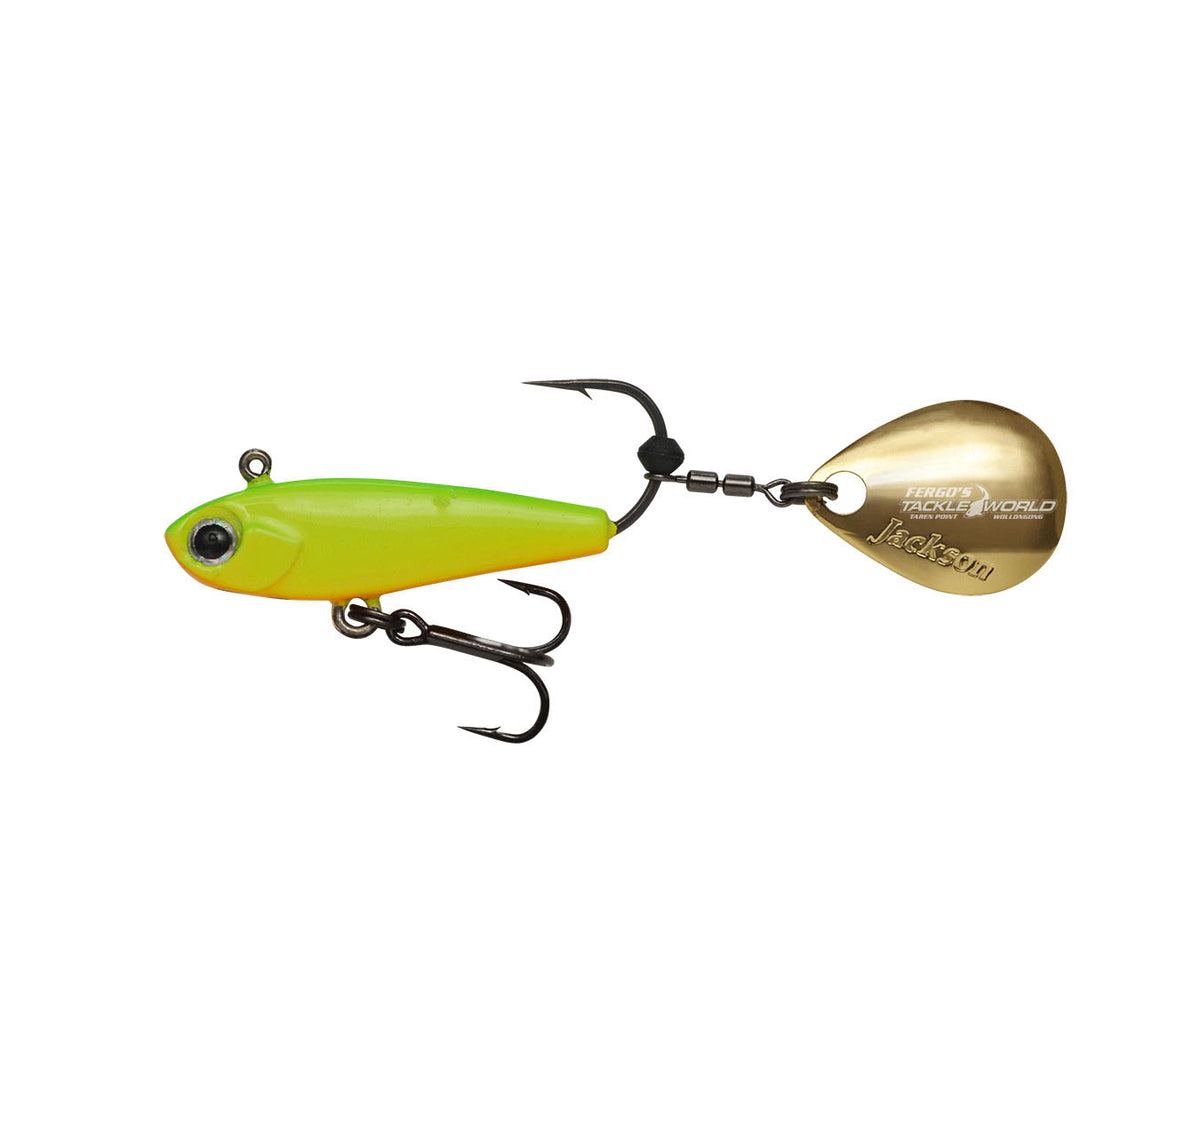 Jackson Iga Jig Spin 7g Lures - 2 Pack